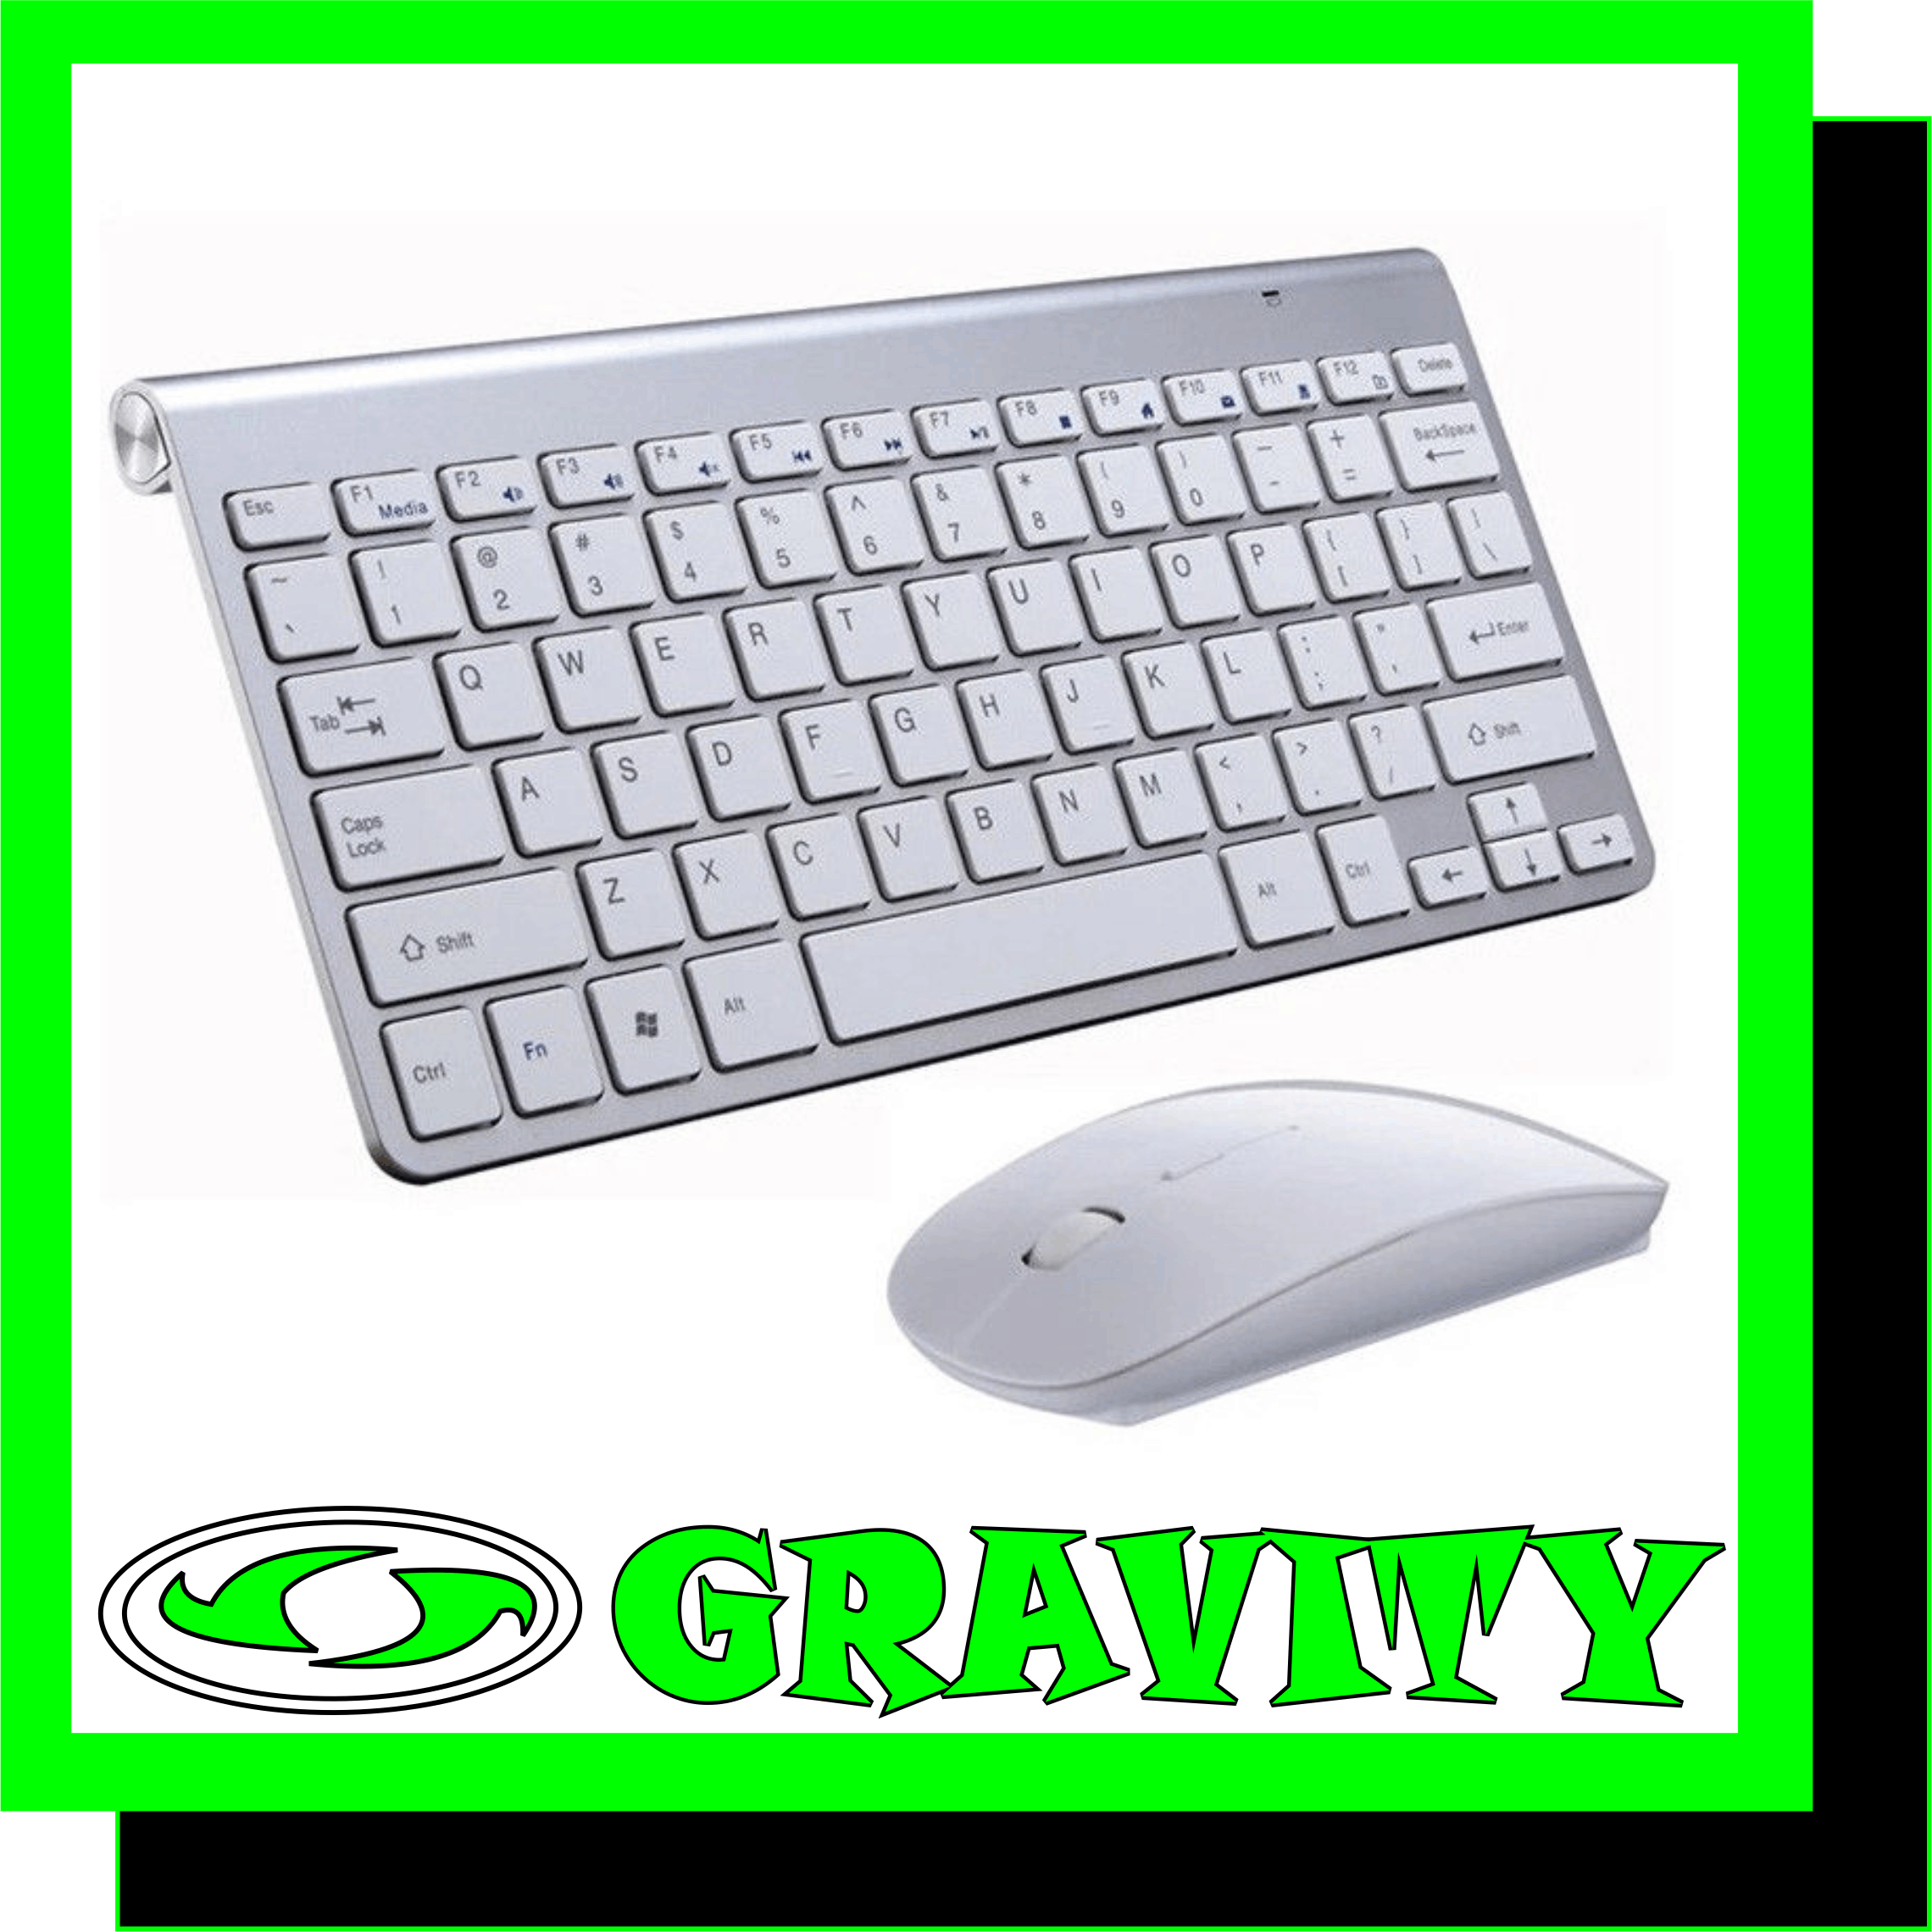 78 keys keyboard                                        Lightweight  Sleep mode to save power  Works with 2 AAA battery ( NOT INCLUDED )  Operating current: 3.7mAh  Operating Voltage : 3.3V dc  Weight: 300+-5g  Dimensions : 28.3×13.3×1.8cm  Sleek and slim Design  Works Wireless  Compatible for – Laptops and PC’s